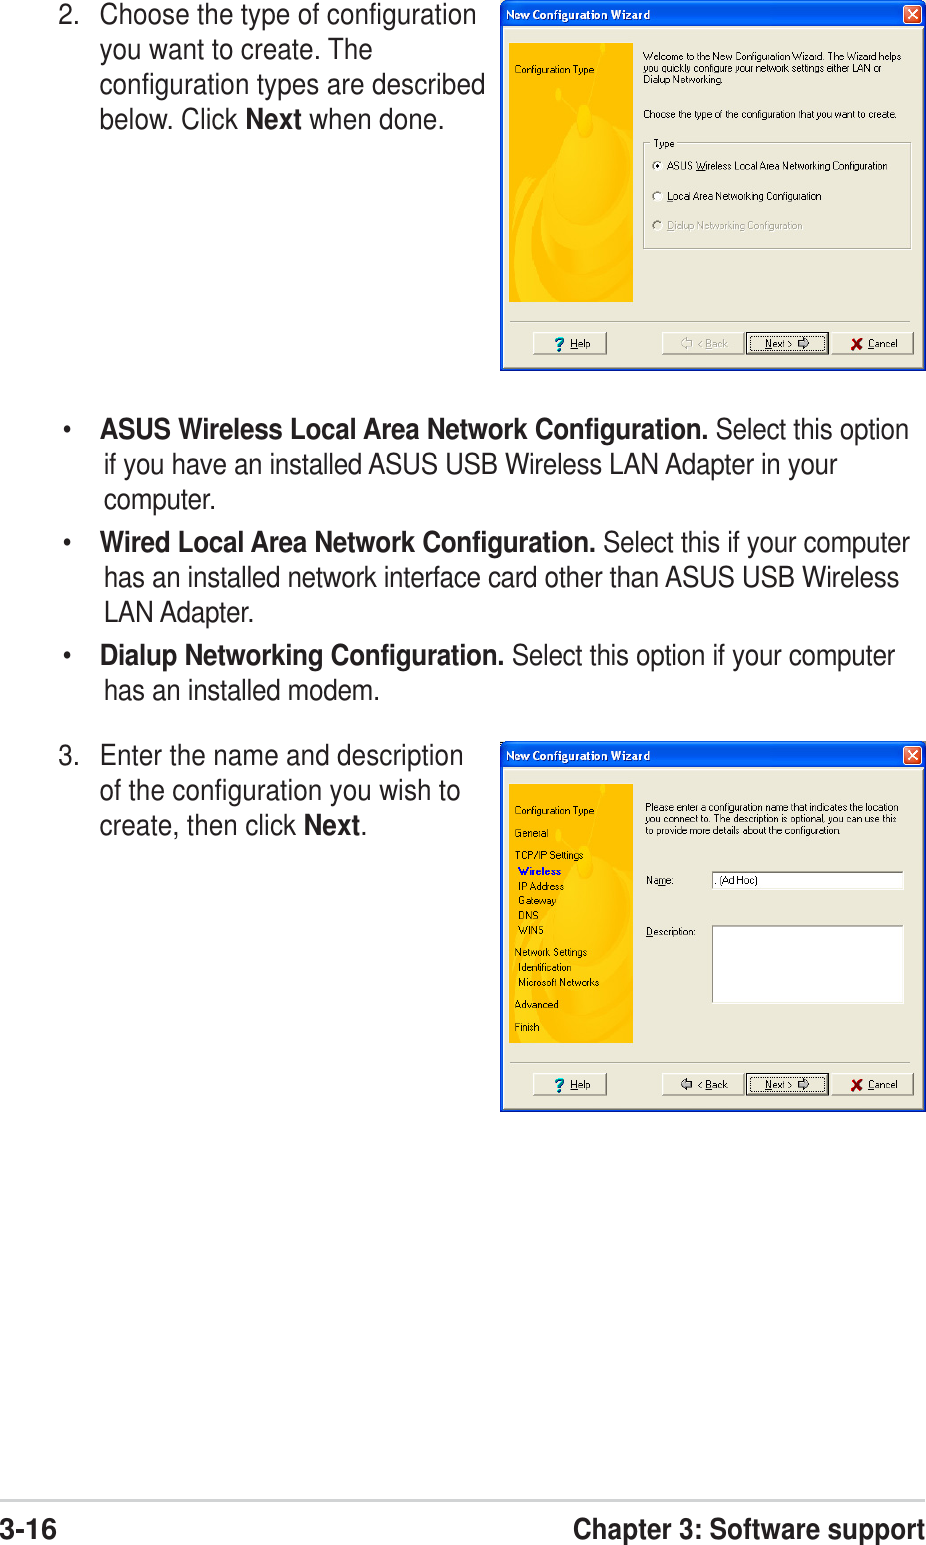 3-16Chapter 3: Software support•ASUS Wireless Local Area Network Configuration. Select this optionif you have an installed ASUS USB Wireless LAN Adapter in yourcomputer.•Wired Local Area Network Configuration. Select this if your computerhas an installed network interface card other than ASUS USB WirelessLAN Adapter.•Dialup Networking Configuration. Select this option if your computerhas an installed modem.3. Enter the name and descriptionof the configuration you wish tocreate, then click Next.2. Choose the type of configurationyou want to create. Theconfiguration types are describedbelow. Click Next when done.